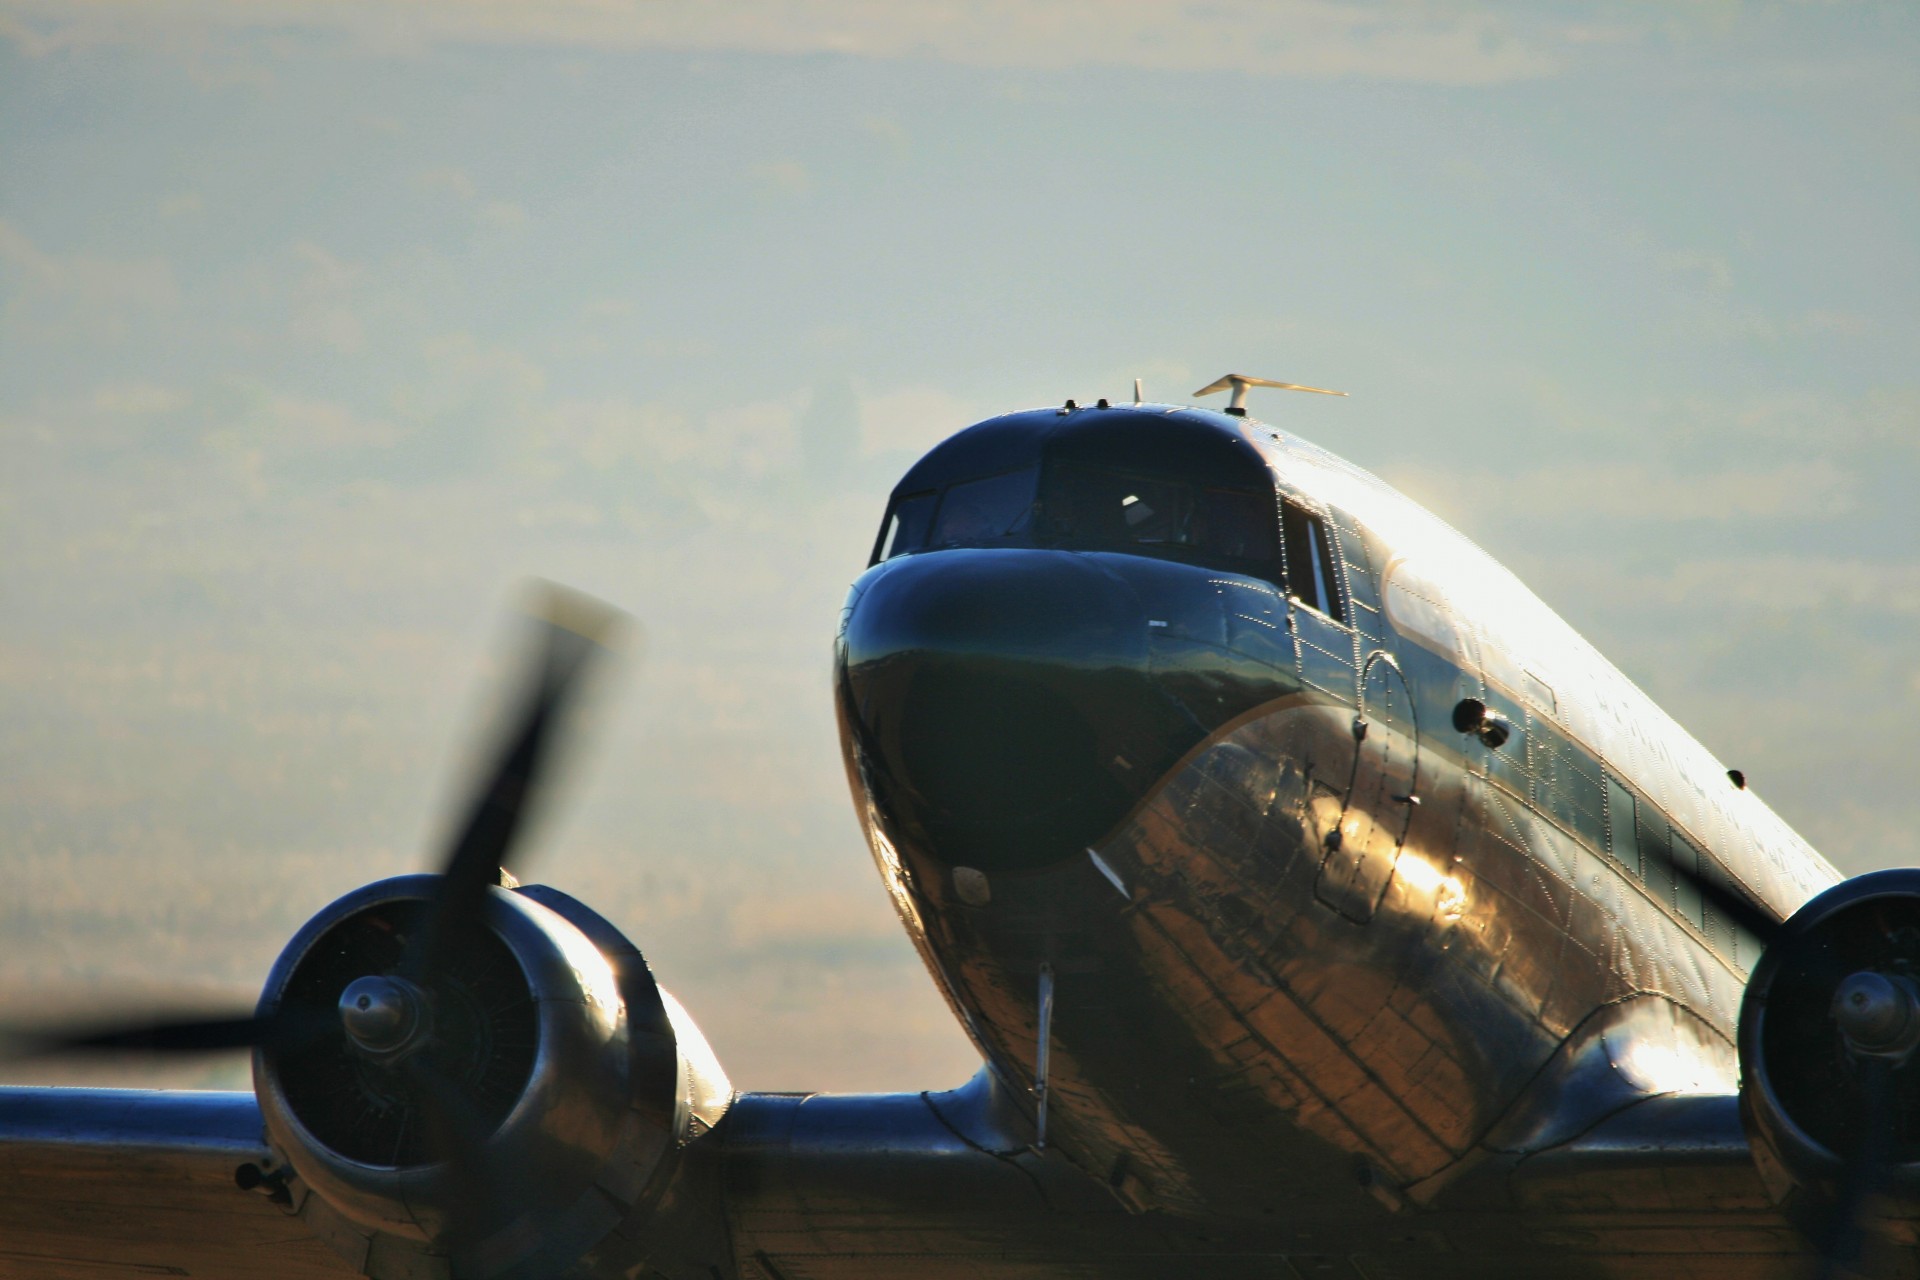 aircraft fixed wing dc-3 free photo